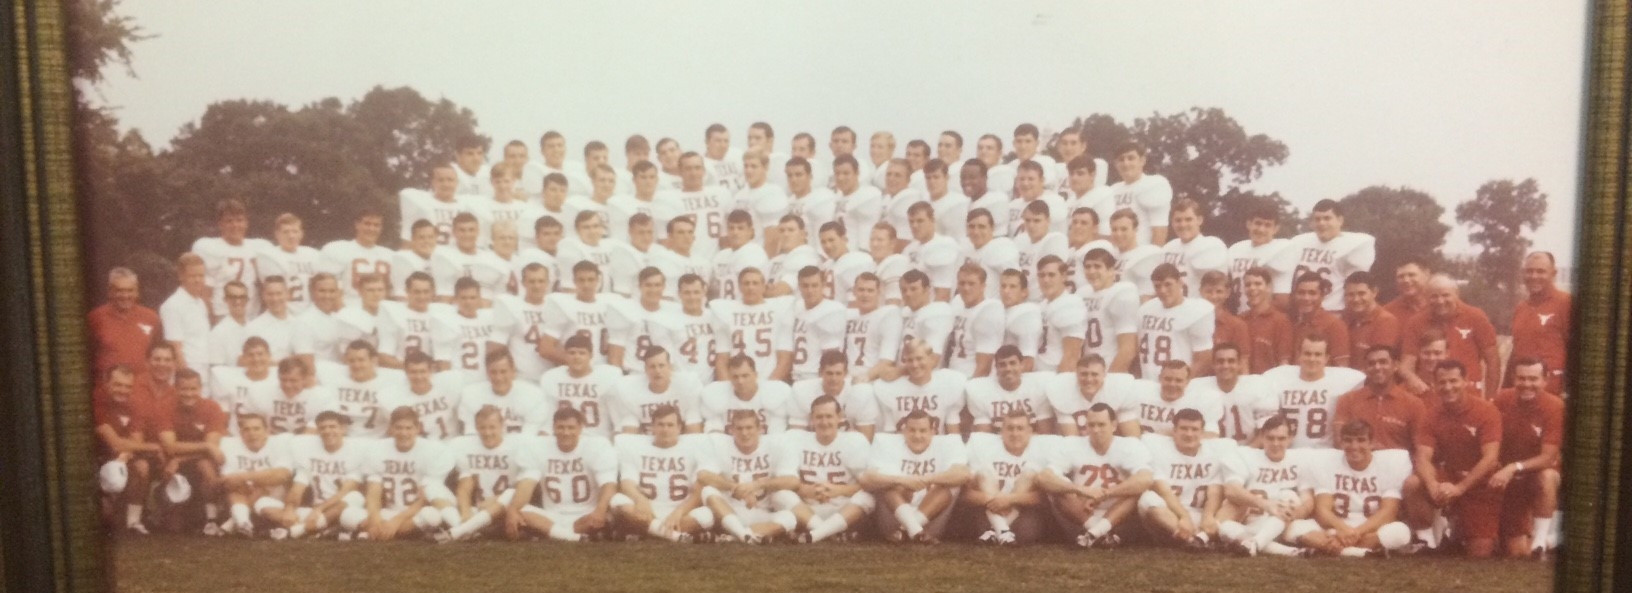 1968 Cotton Bowl Champions- Loyd is #55 right in the middle on the front row